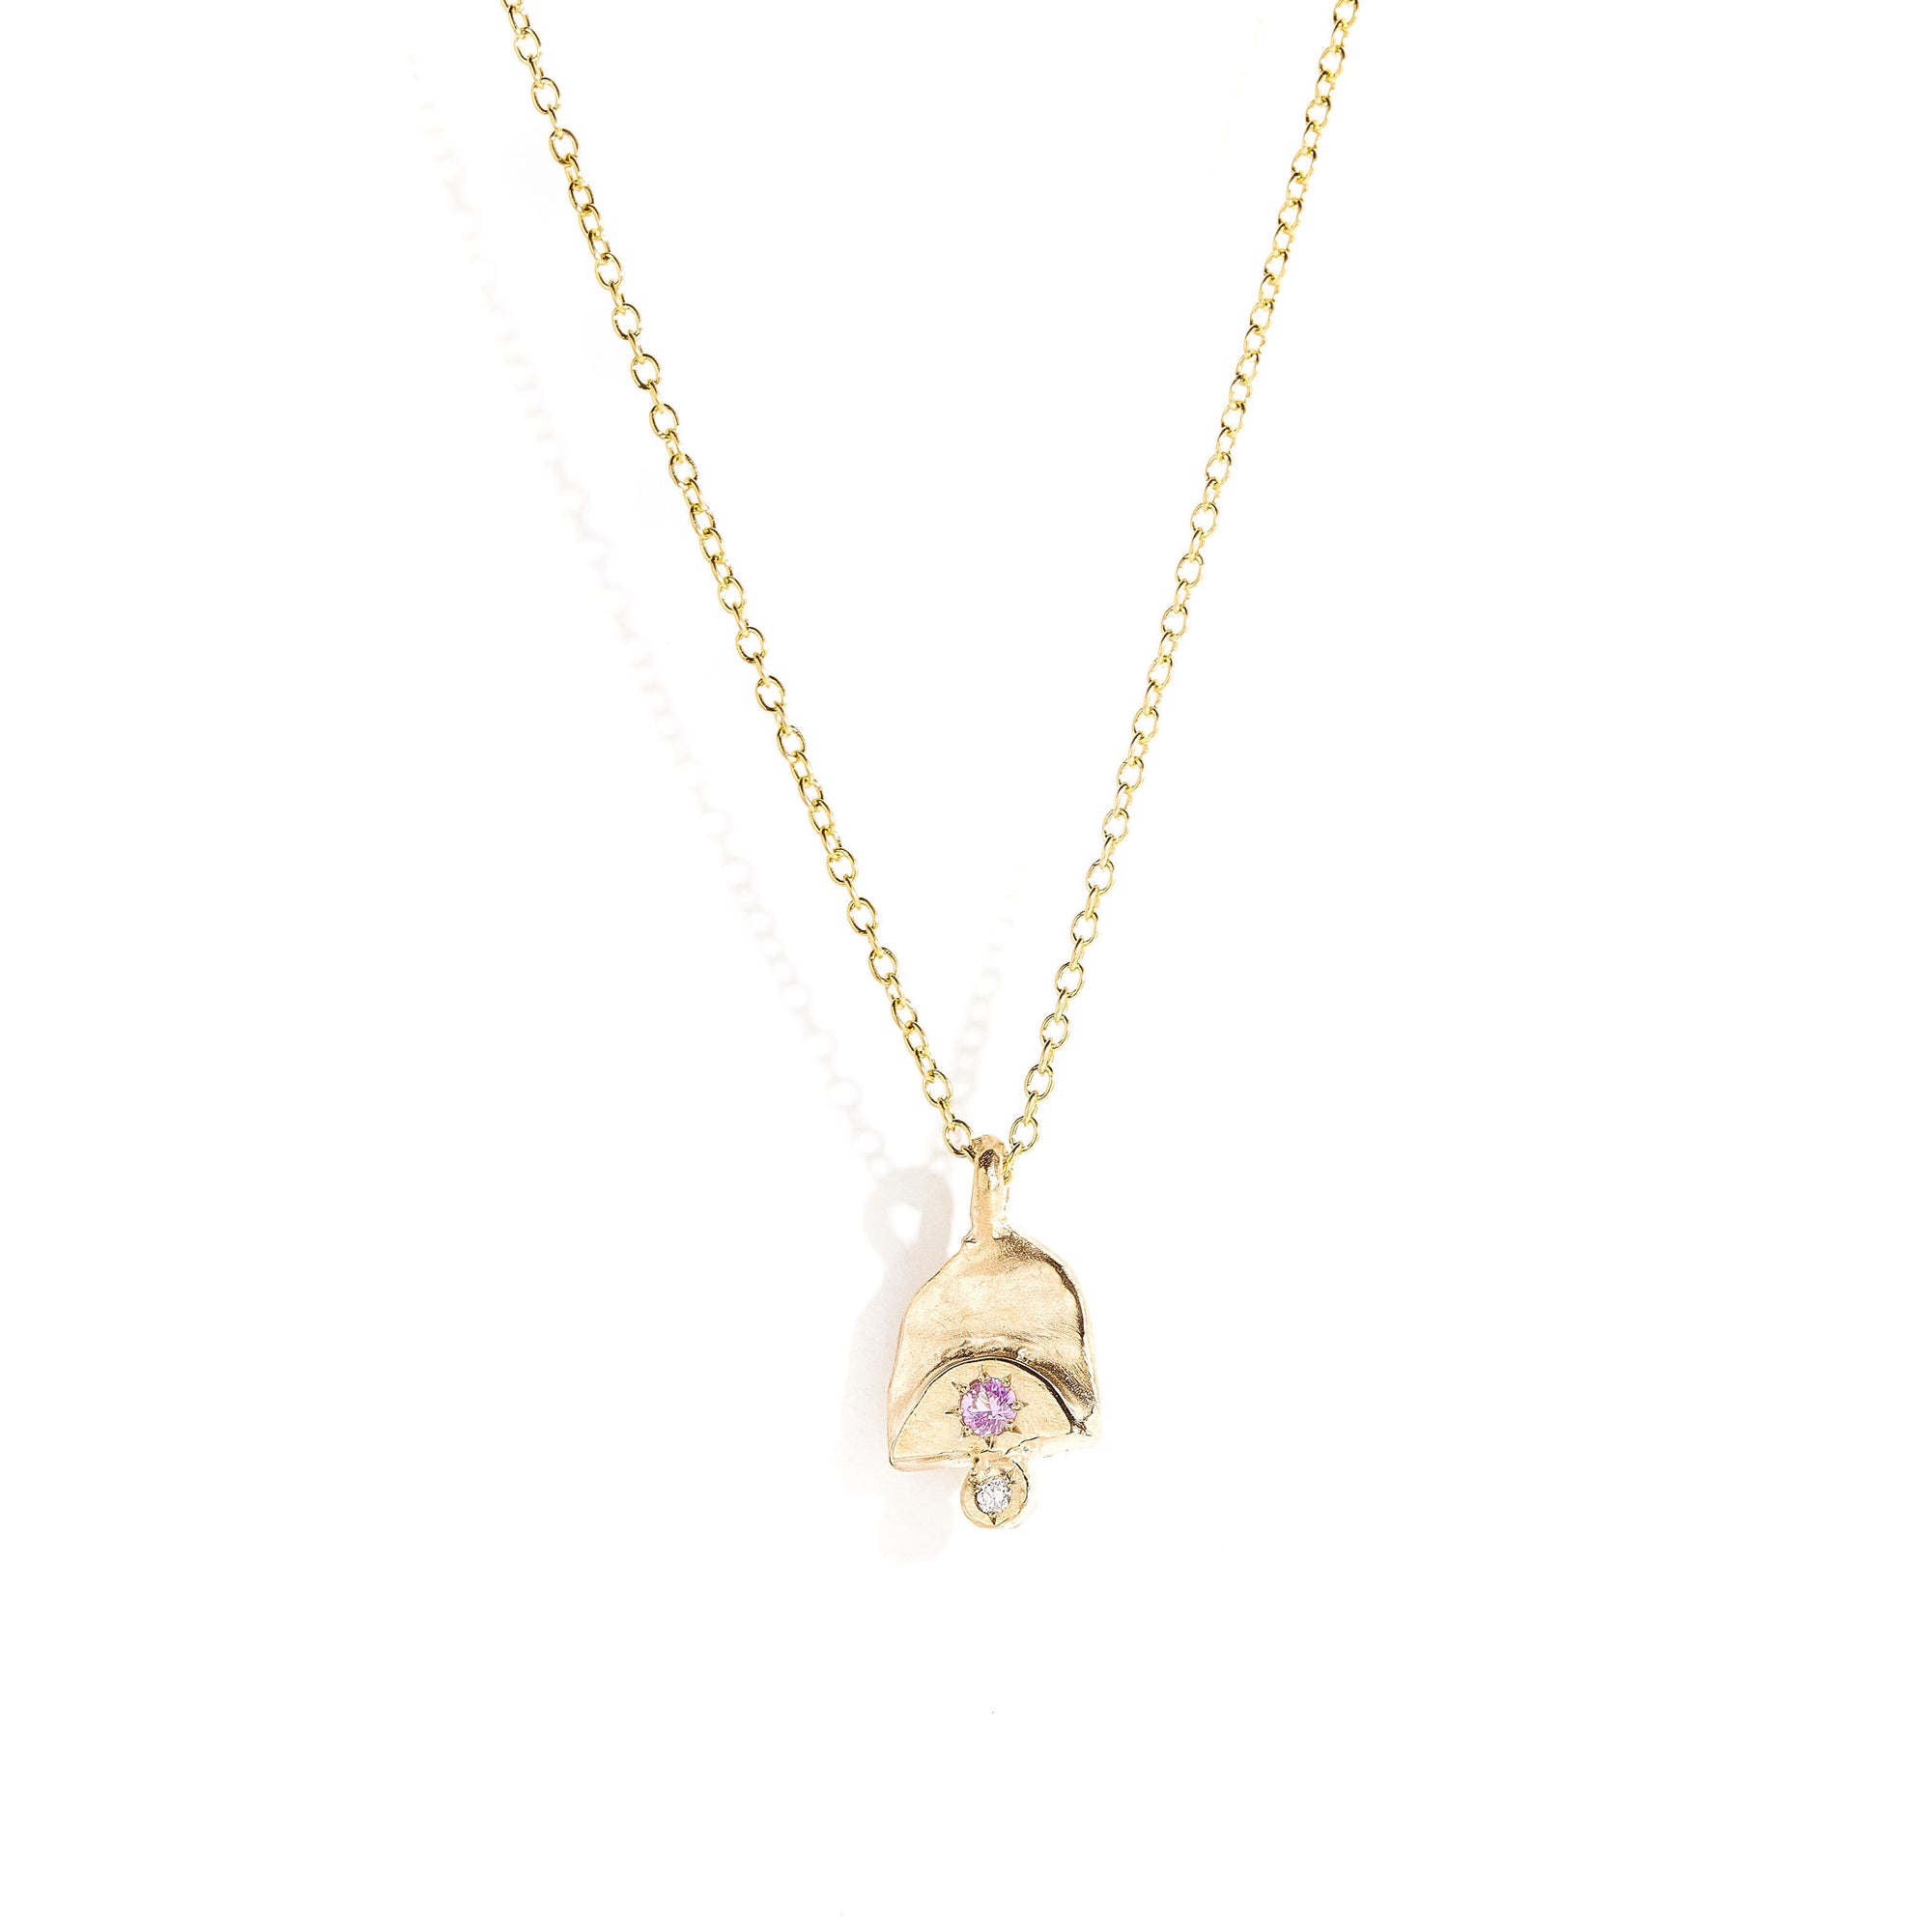 Pink sapphire and white diamond pendant in 9 carat yellow gold. 